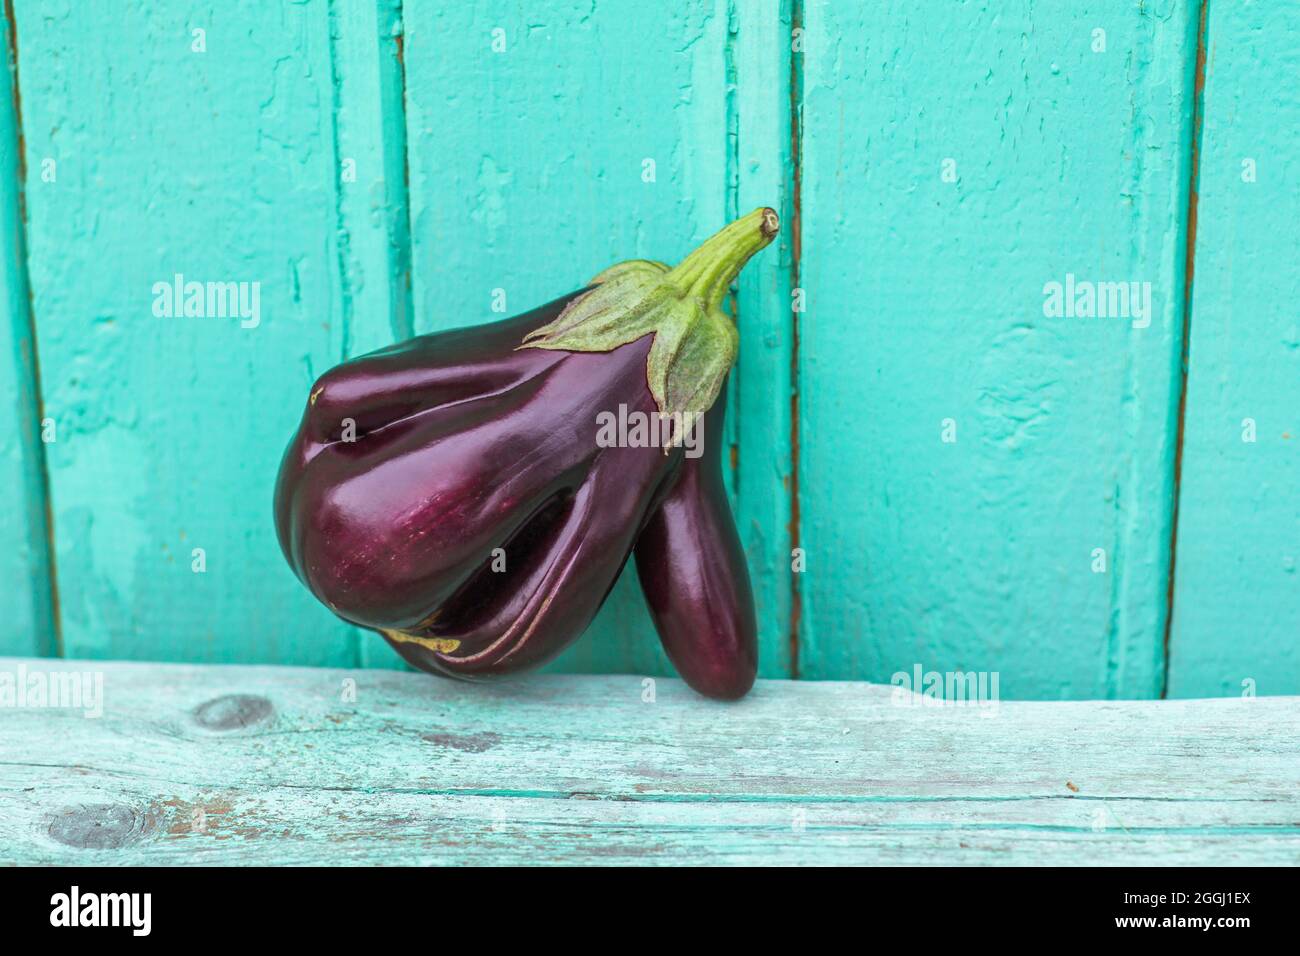 Ugly eggplant on a blue background. Funny, unnormal vegetable concept Stock Photo